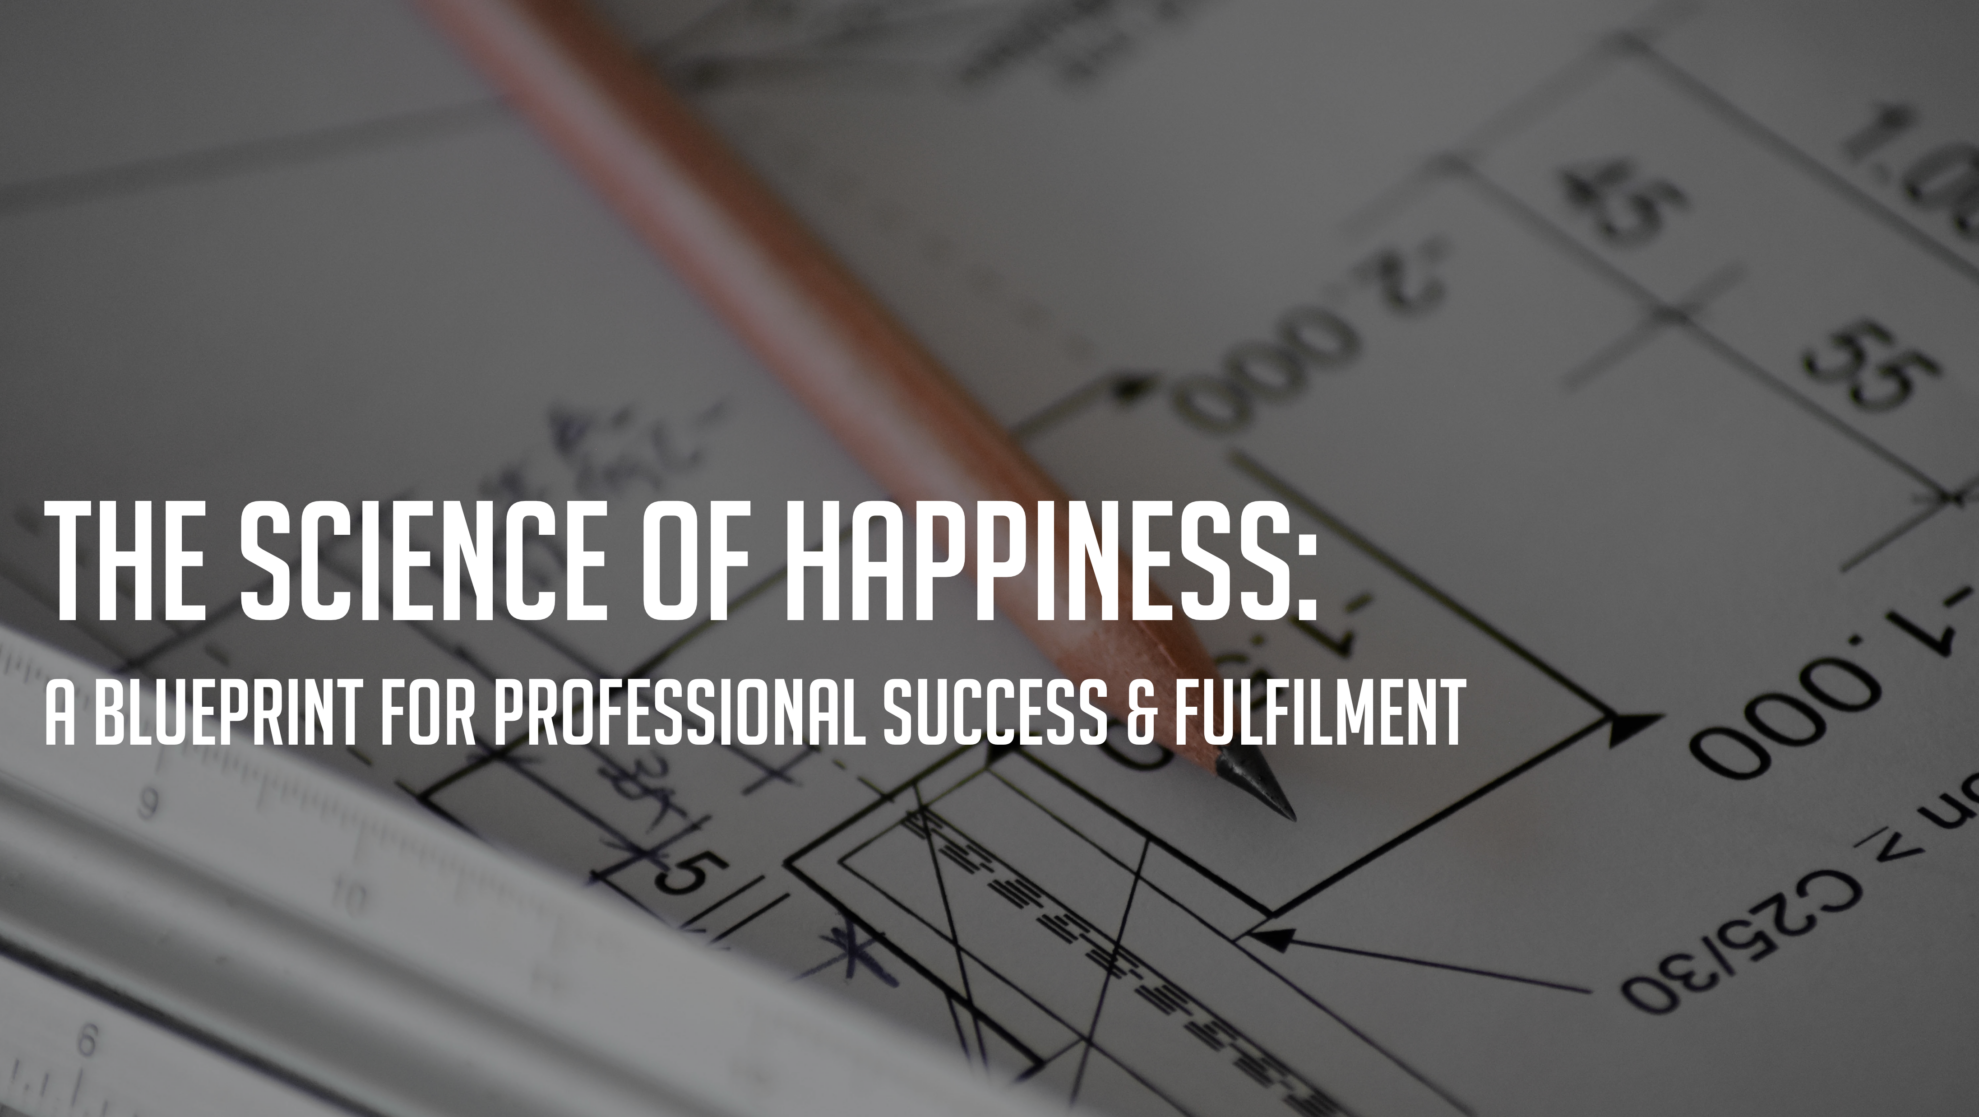 The Science of Happiness: A Blueprint for Professional Success and Fulfillment